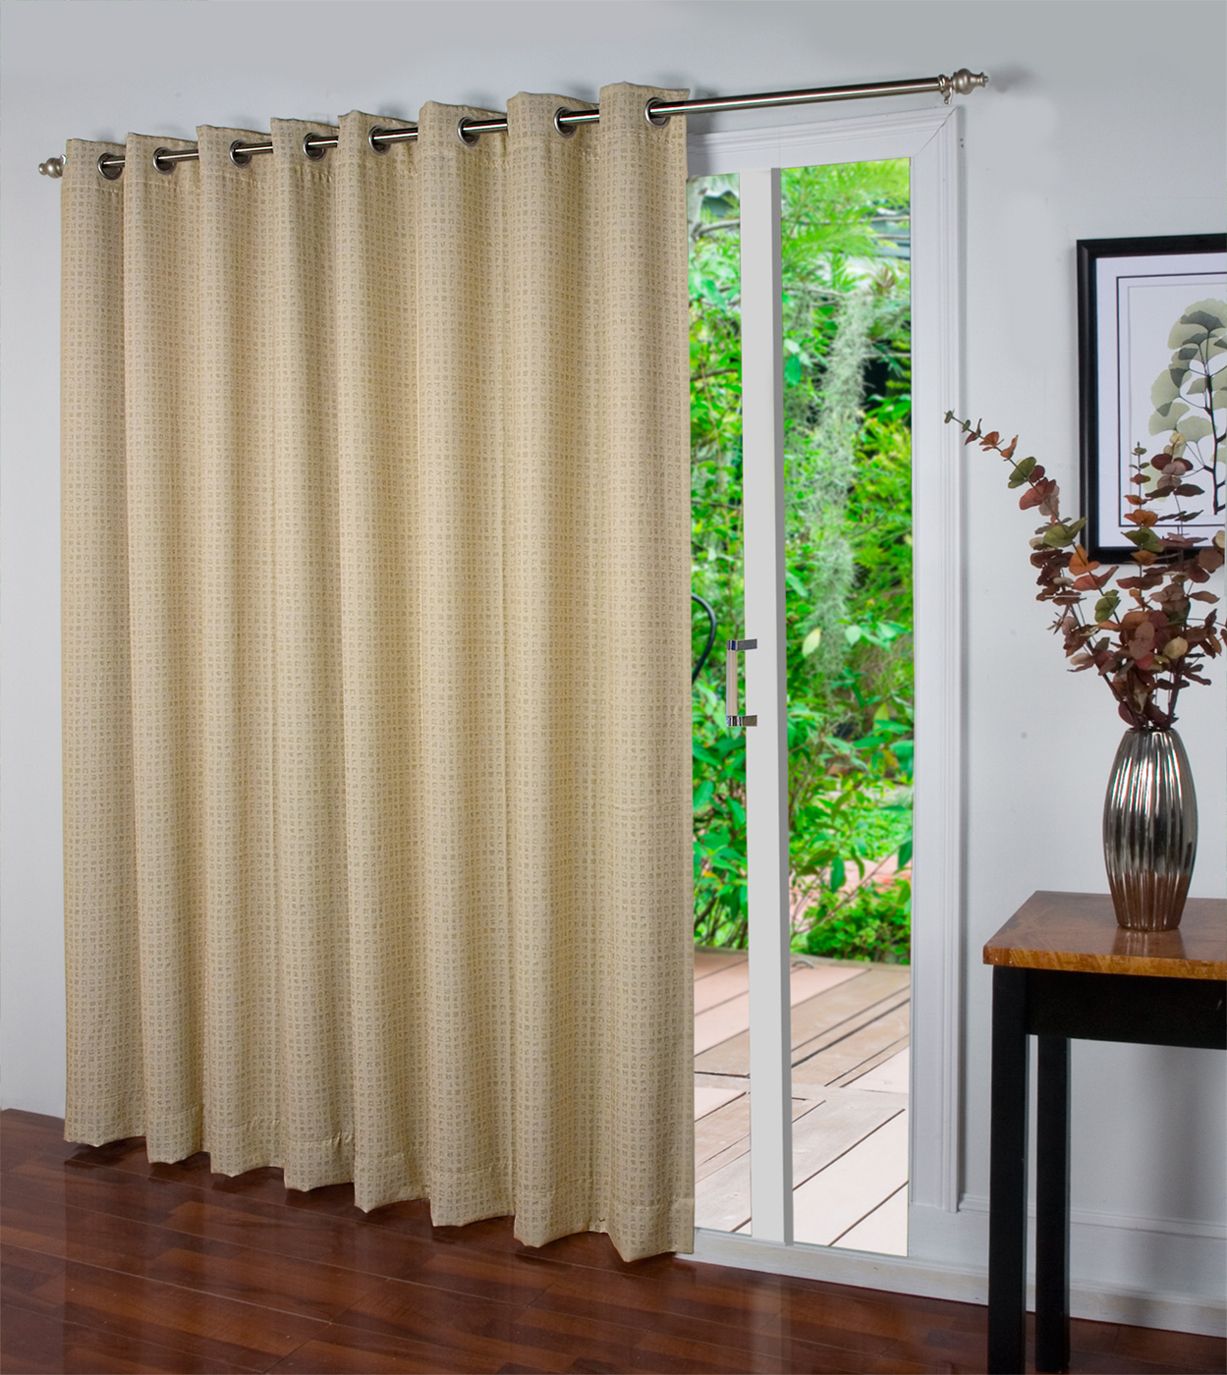 Patio Door Curtains – Thecurtainshop In Patio Grommet Top Single Curtain Panels (View 7 of 20)